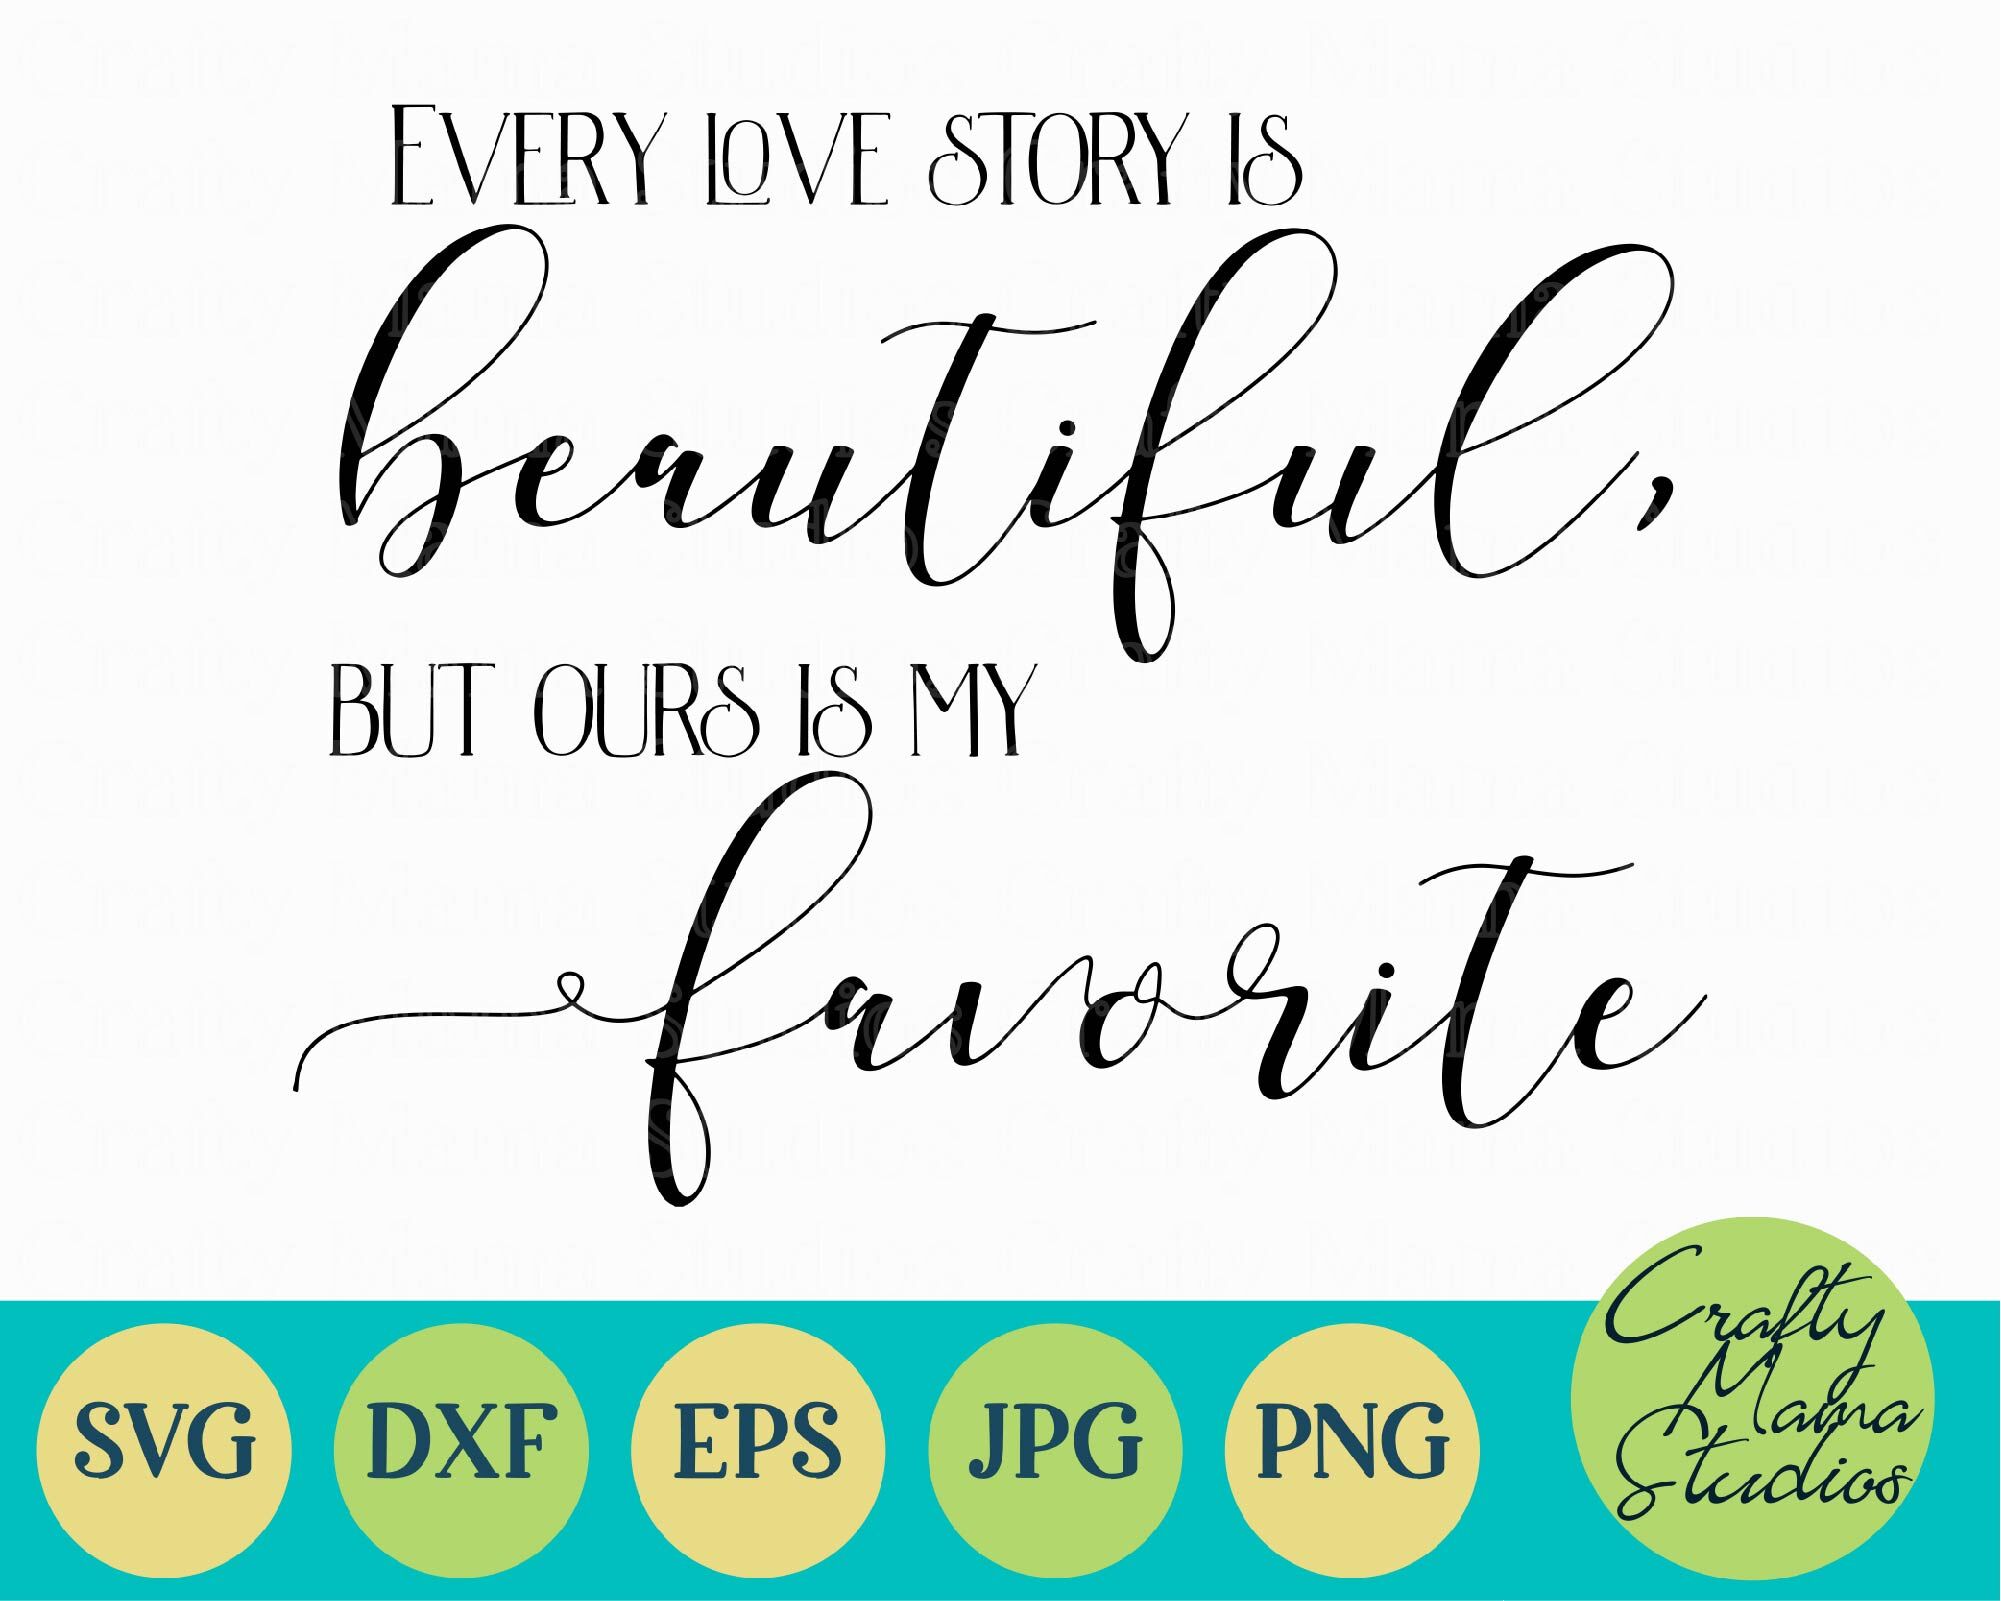 Love Svg Every Love Story Is Beautiful But Ours Is My Favorite Svg By Crafty Mama Studios Thehungryjpeg Com